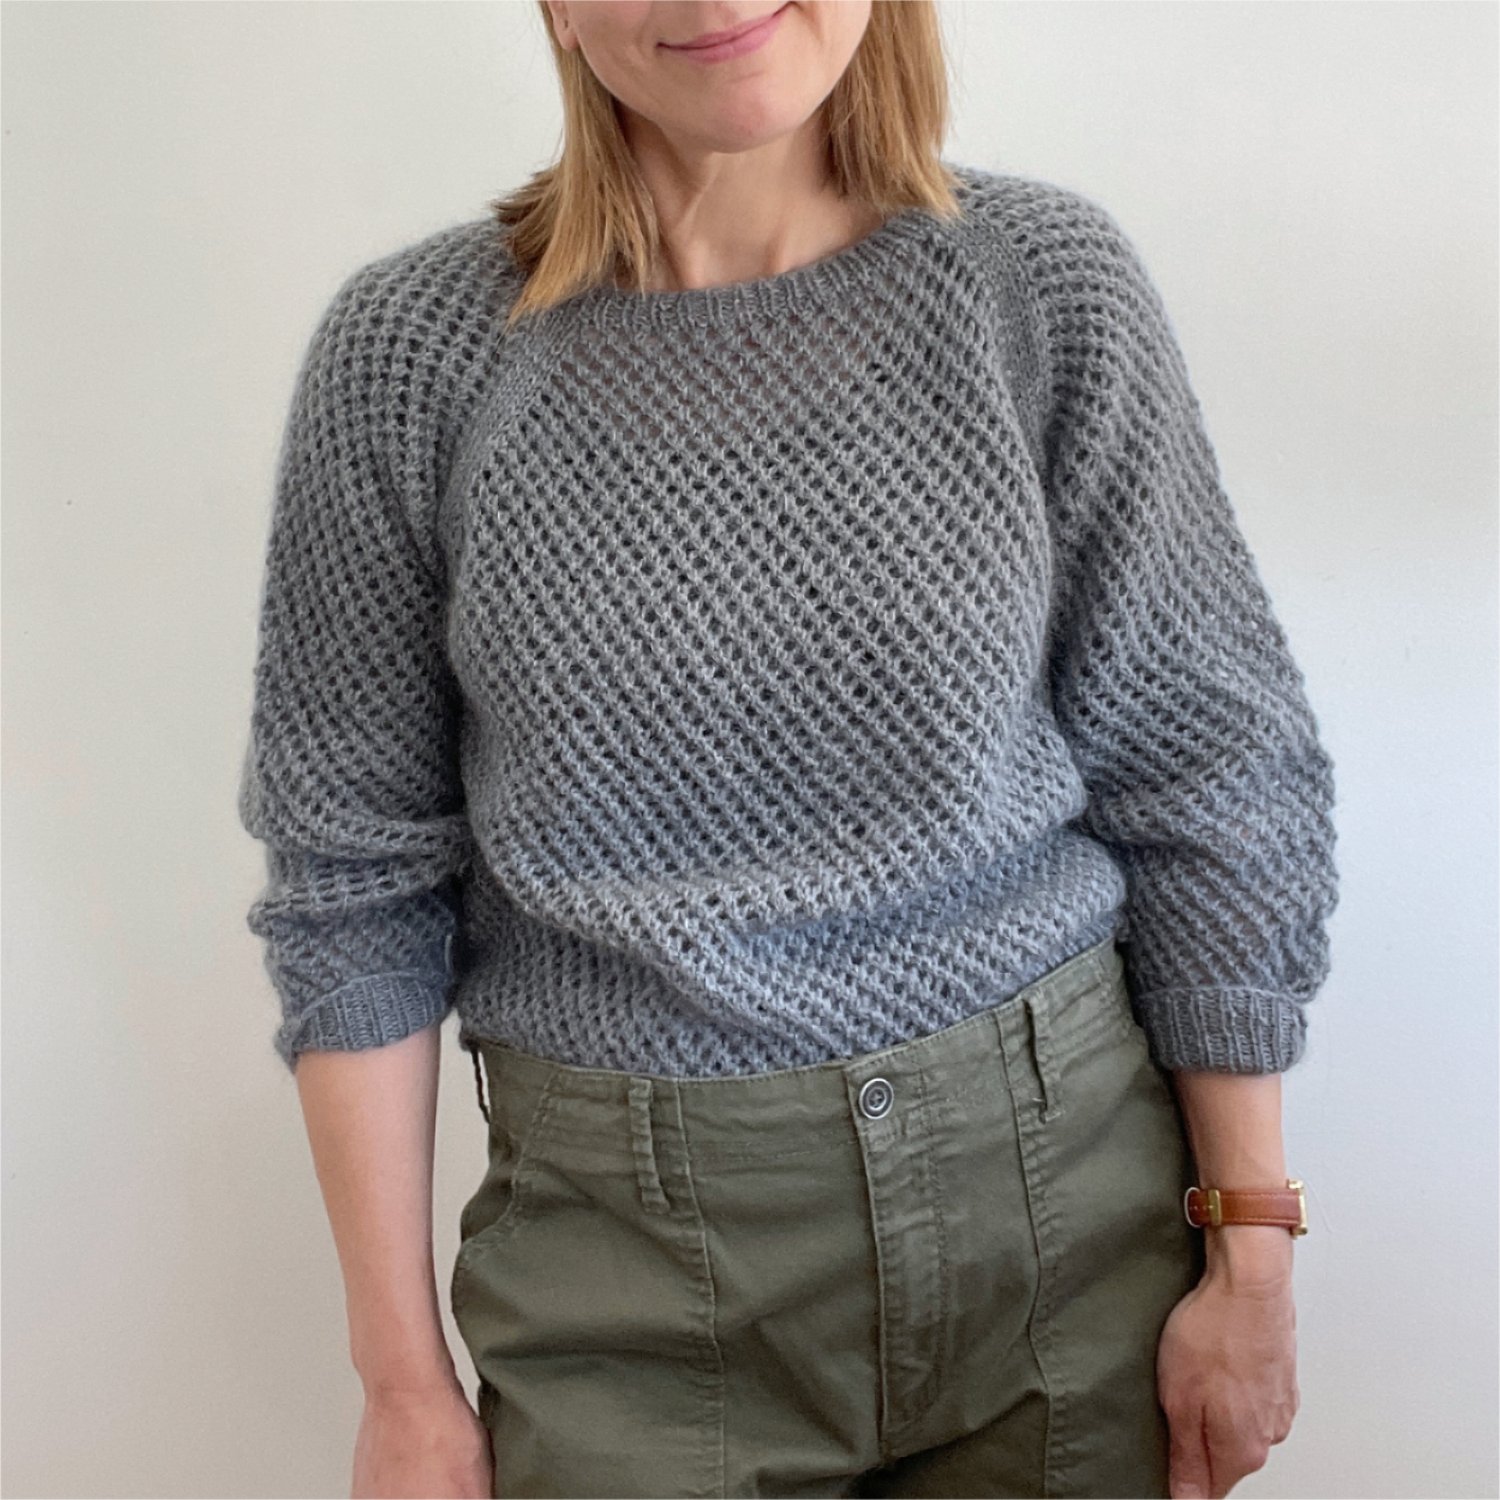 Simple Lace Pullover knitting pattern — Cleome Smith Knits